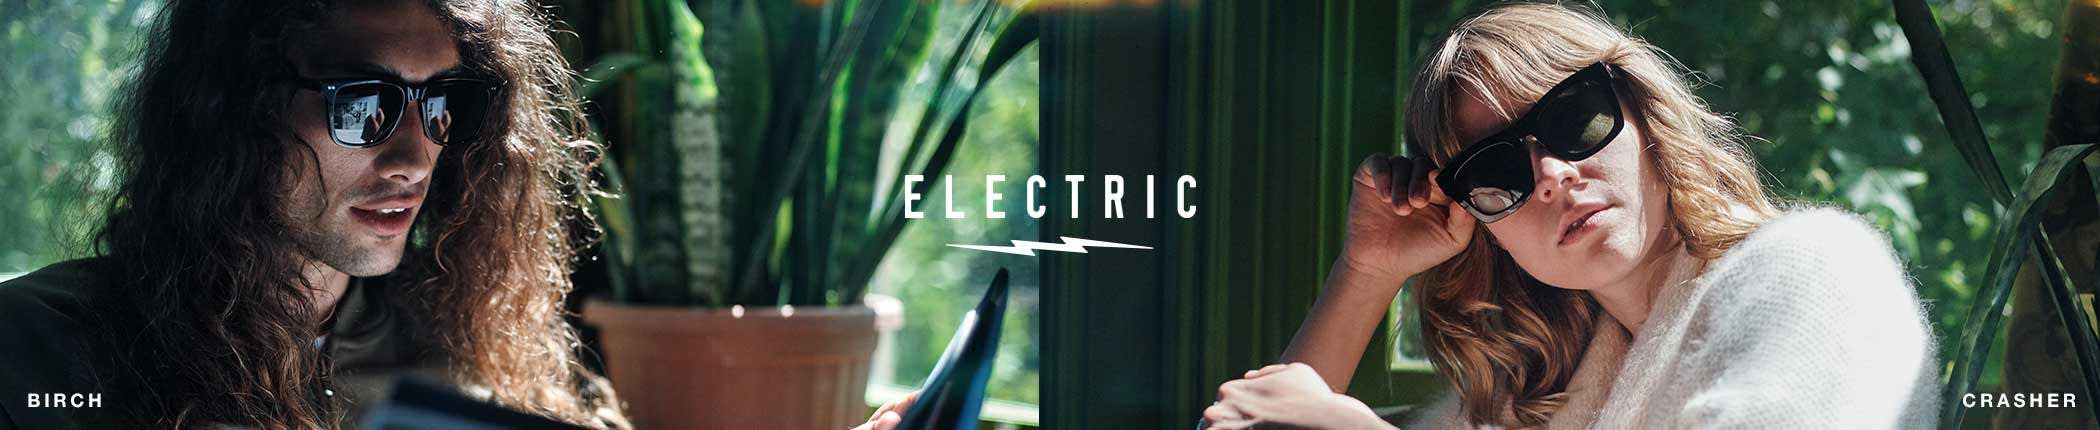 Shop Electric Sunglasses - featuring Electric Birch and Electric Crasher 53